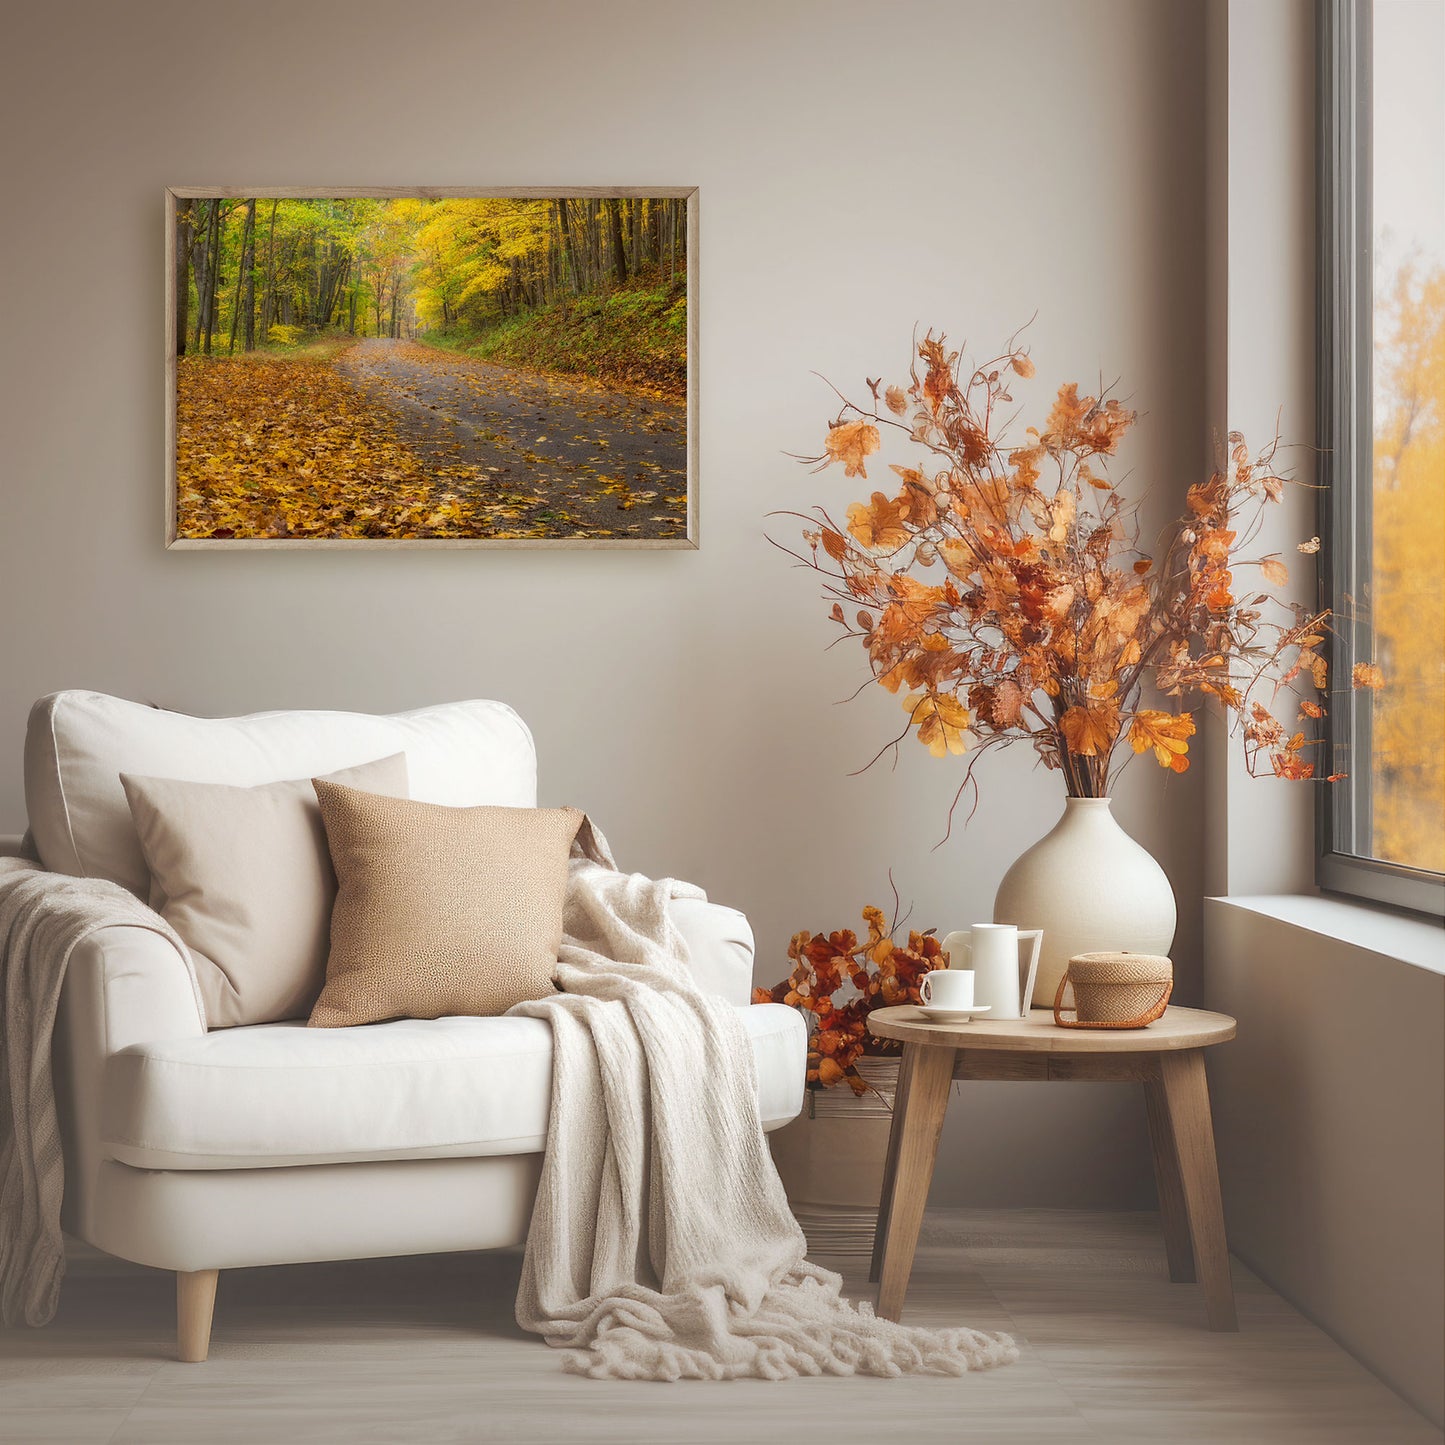 Winding country road amidst vibrant autumn foliage in Hocking Hills, Ohio, depicted in the Autumn Road Print.